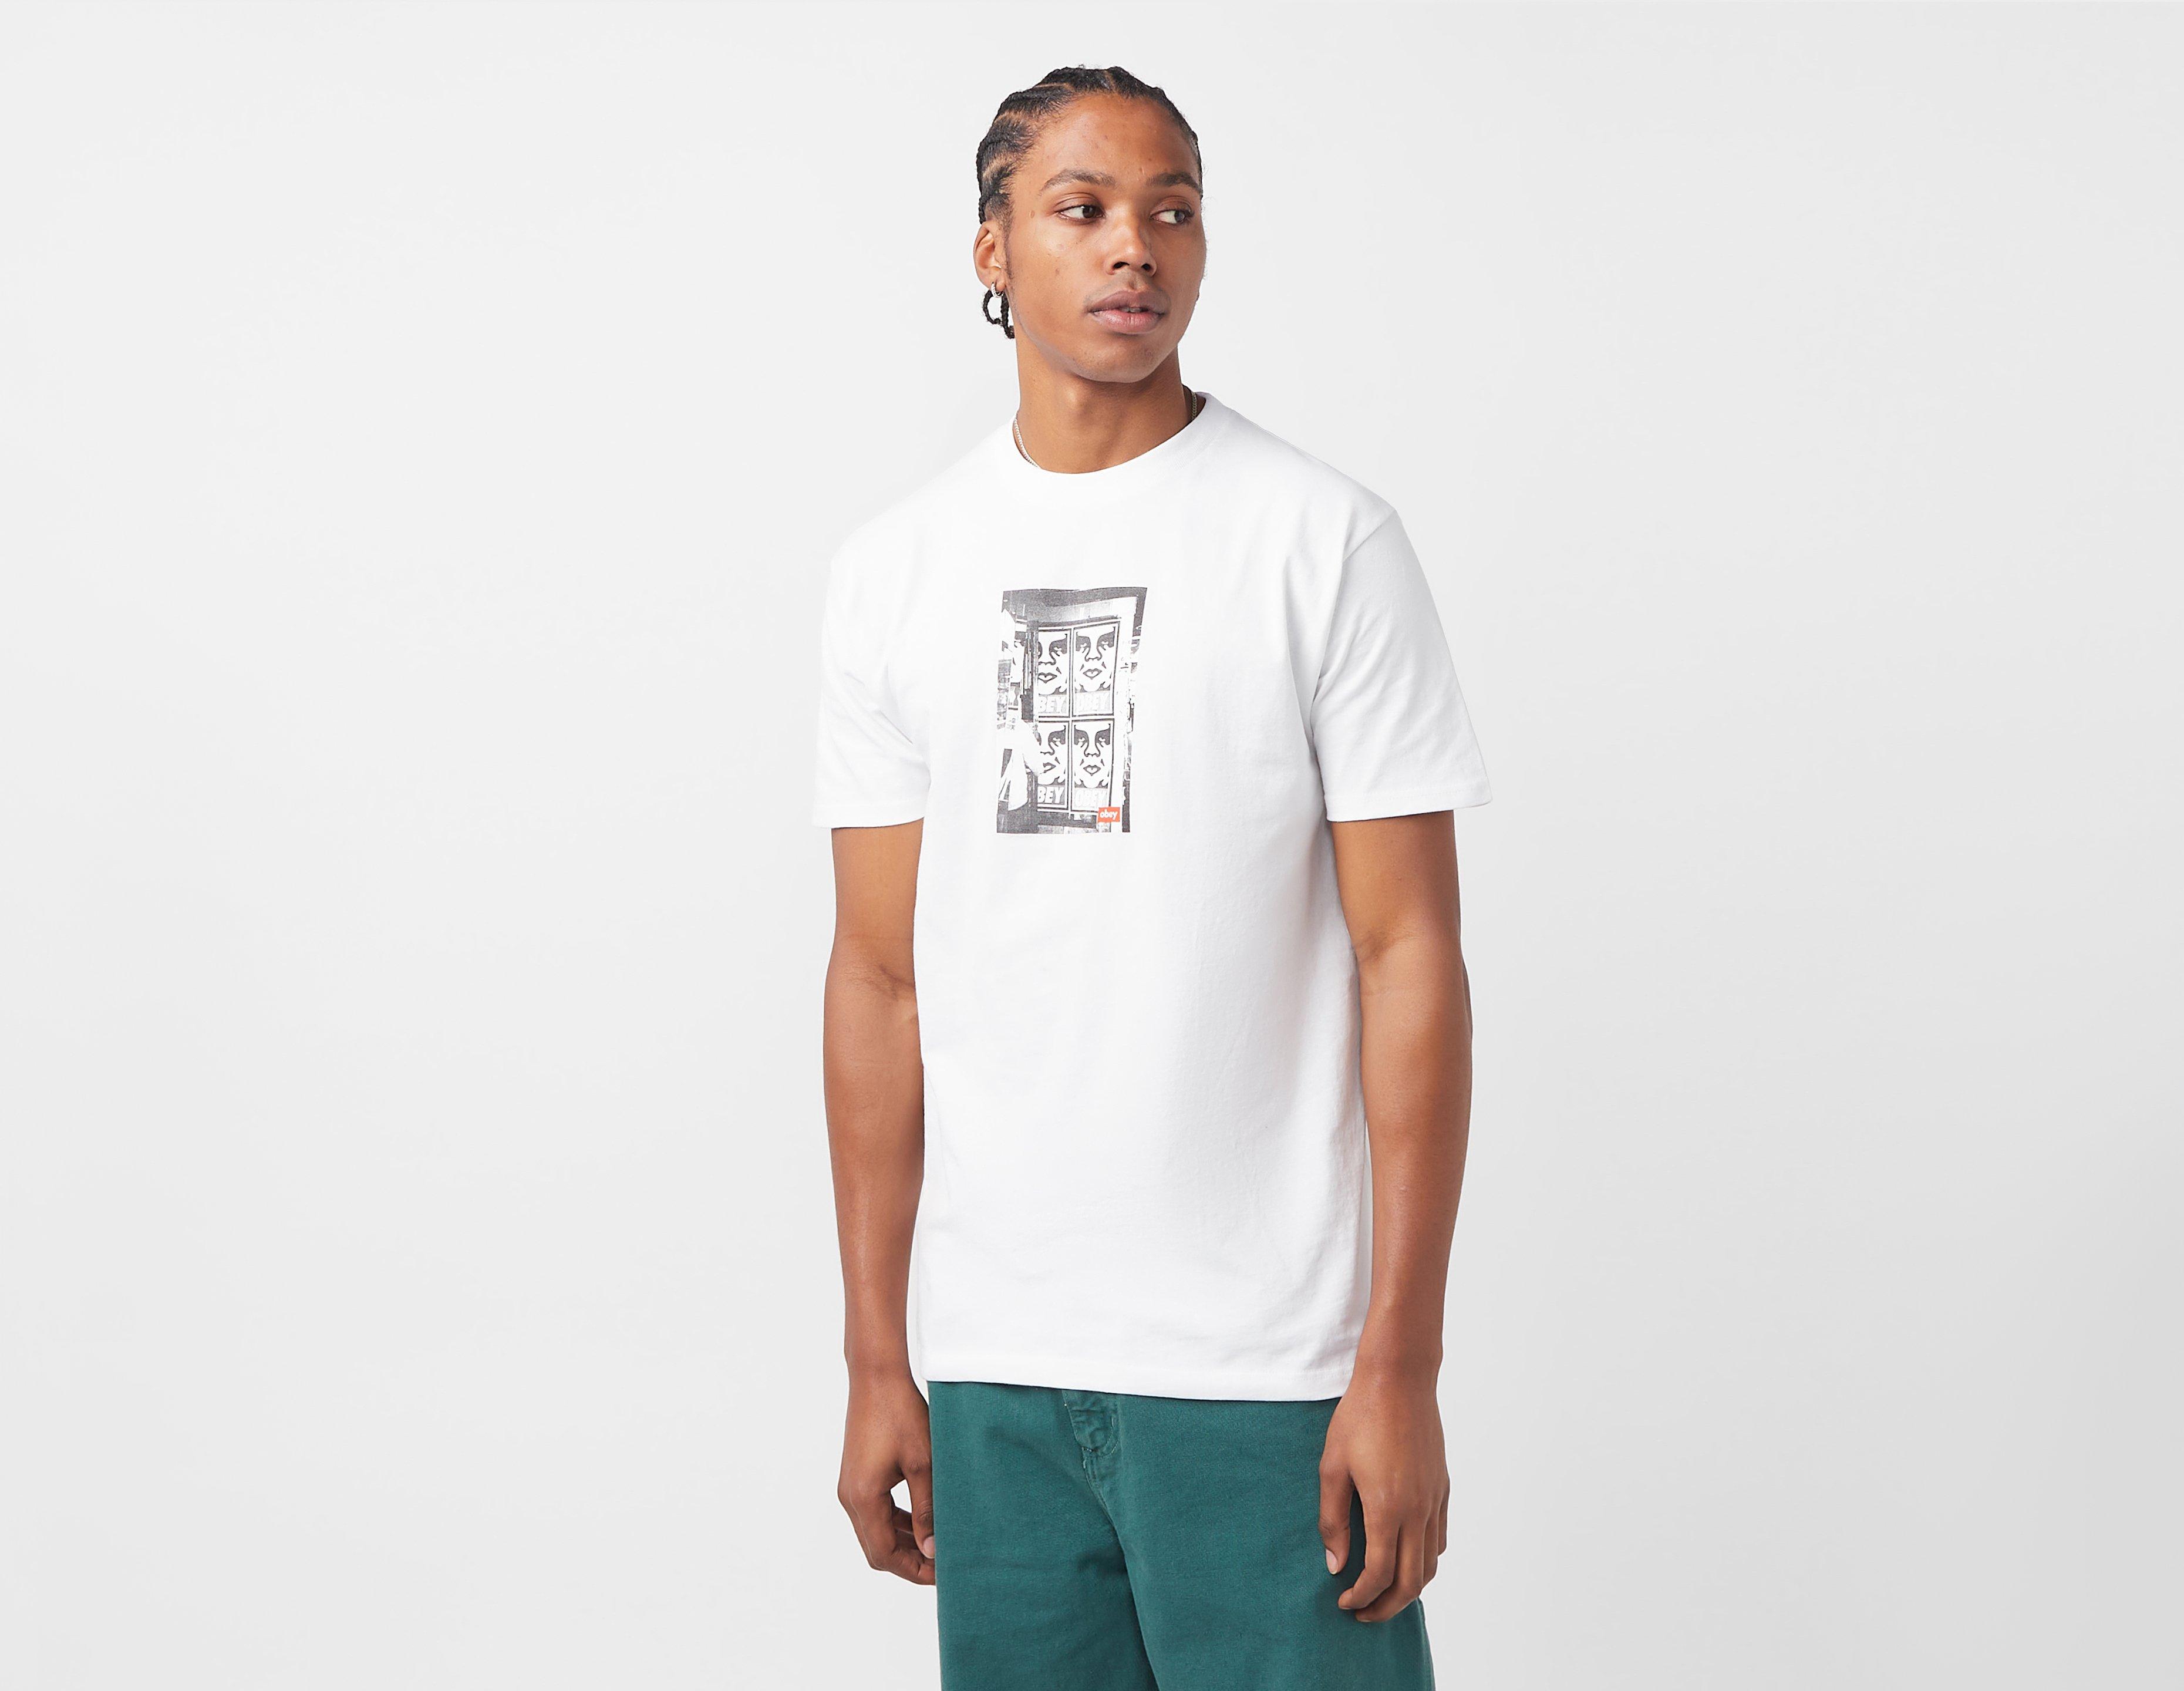 Rot Shirt short-sleeved Obey | - T-shirt Healthdesign? Photo Icon - White T